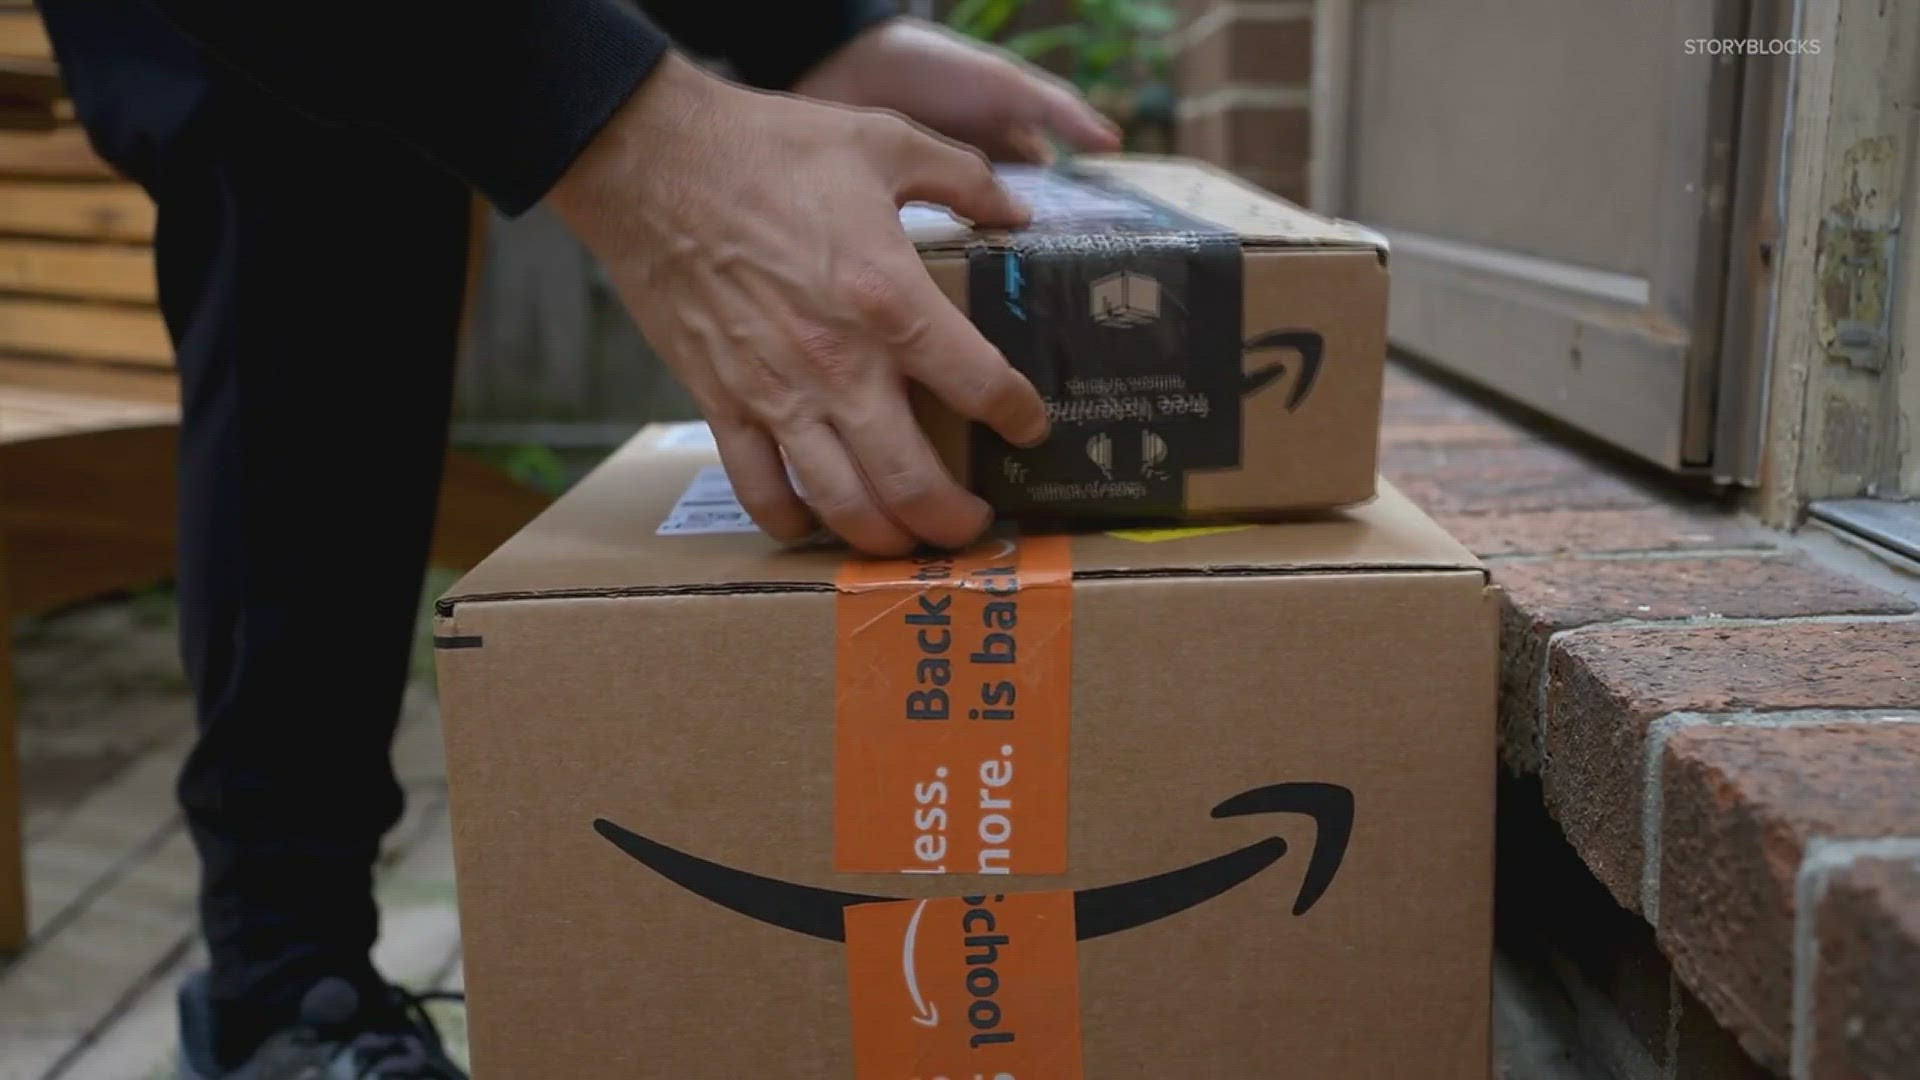 Amazon only added a $1 return fee if you drop off your item at certain stores. It won’t apply to every return.